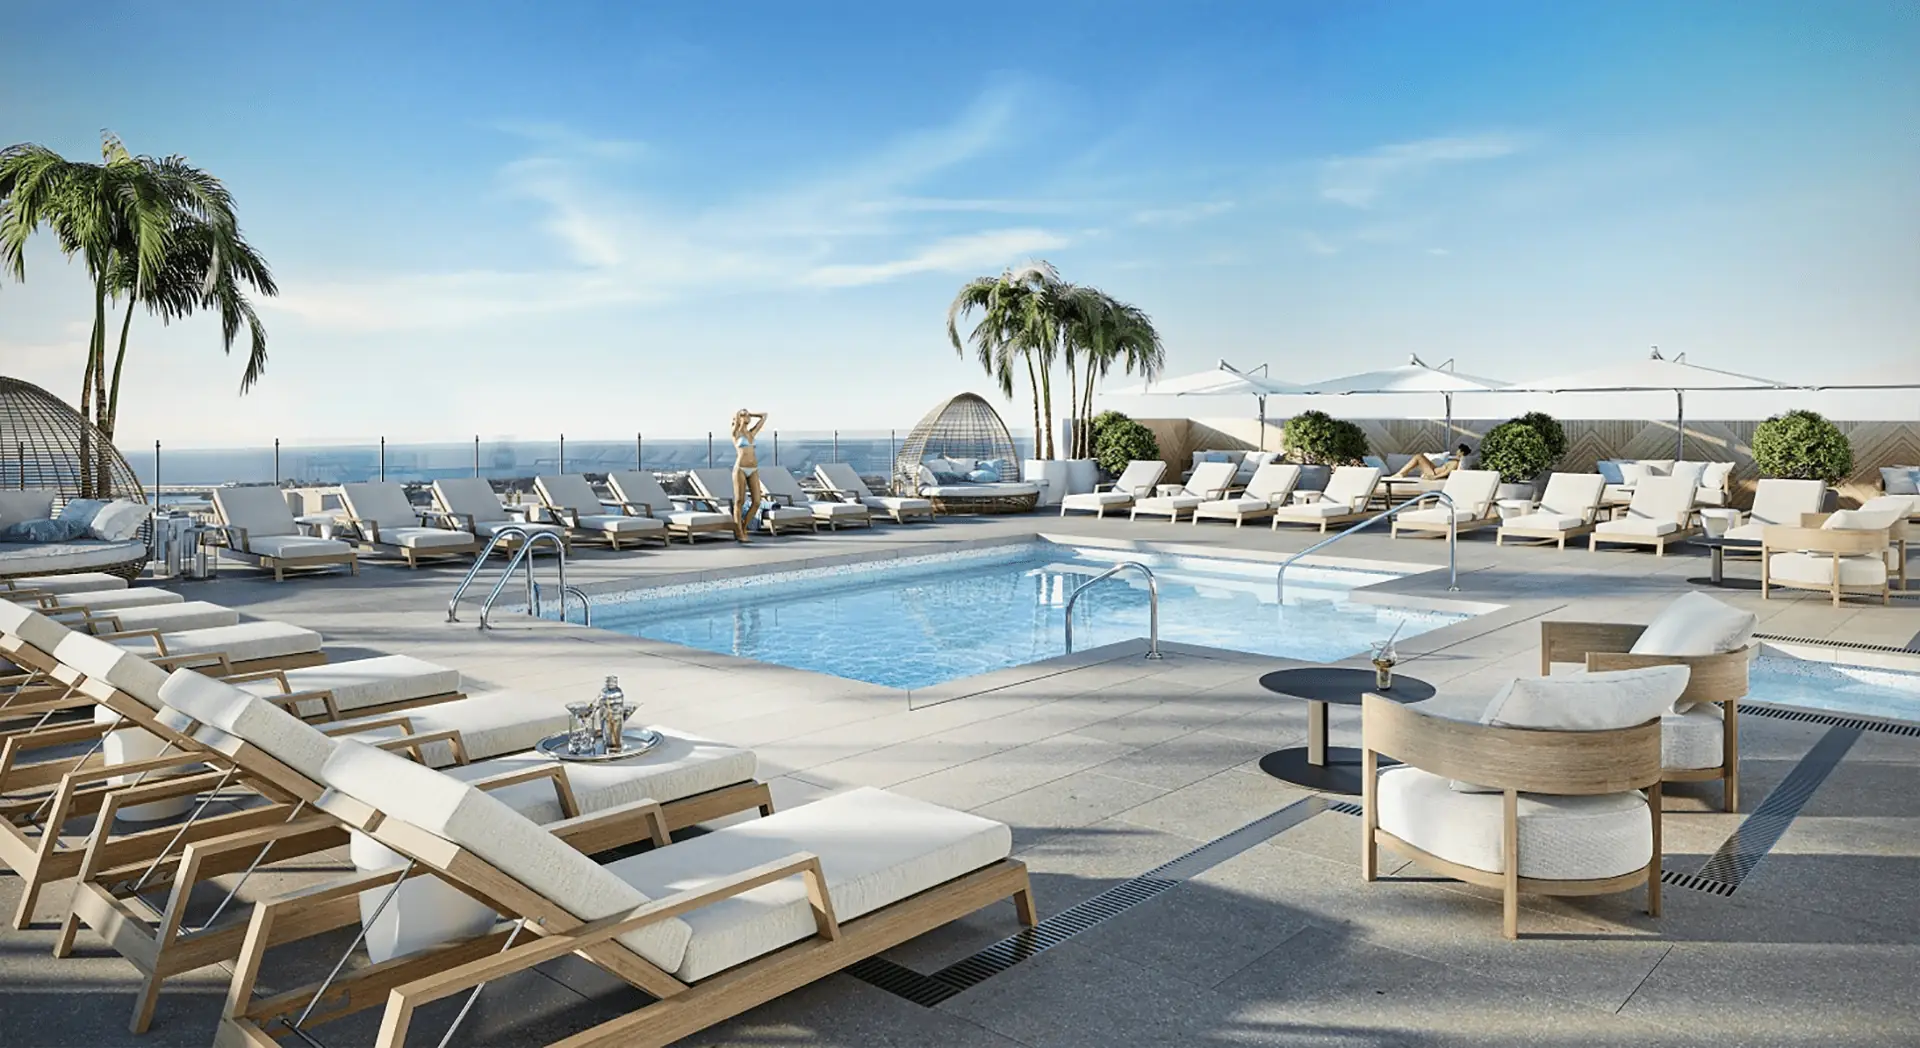 Rendering of a rooftop pool with lounge chairs surrounding the pool.